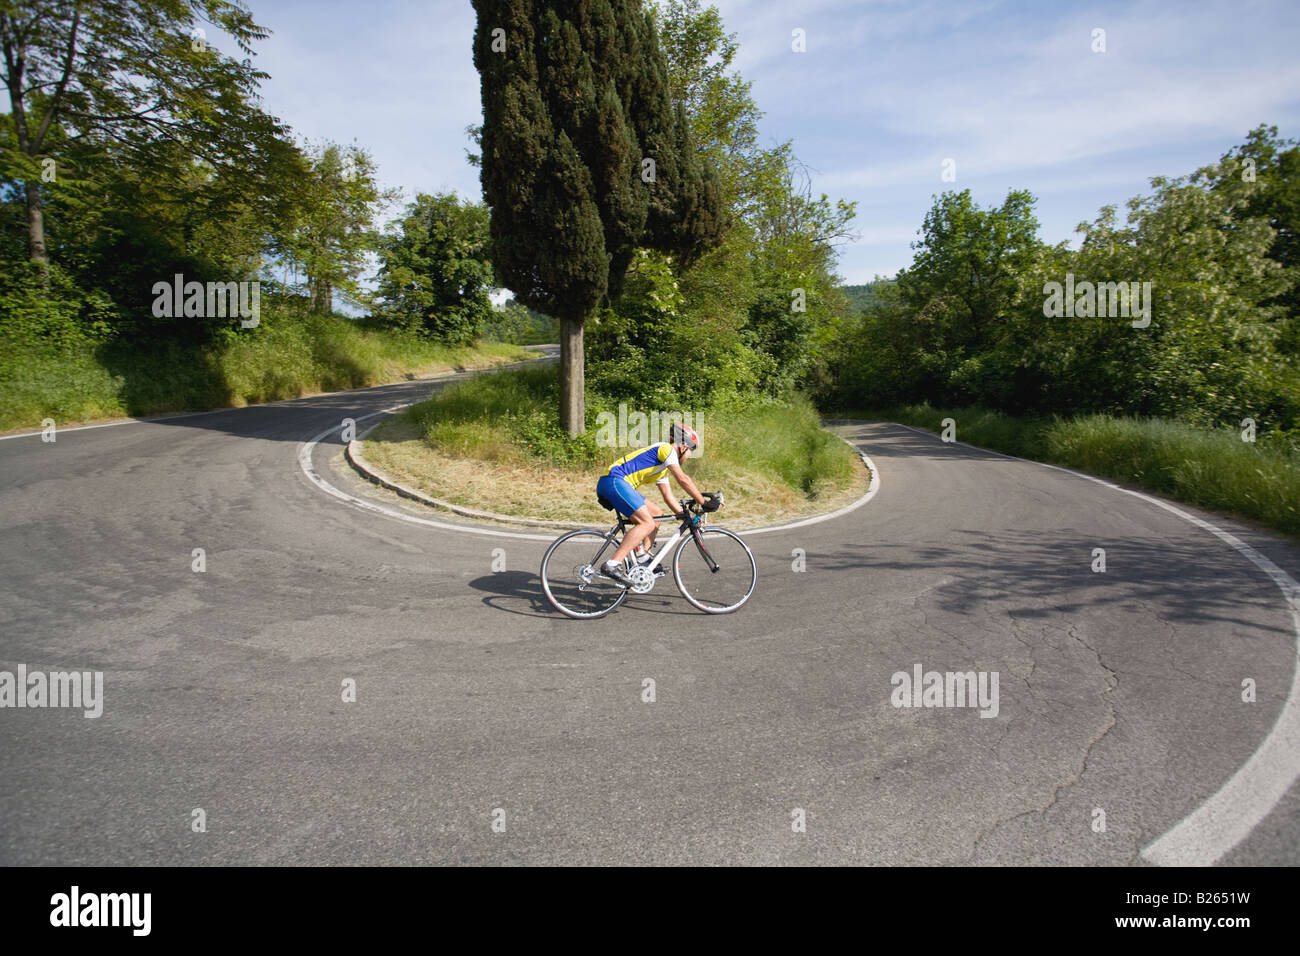 Cyclist cornering on switchback road,  side view Stock Photo